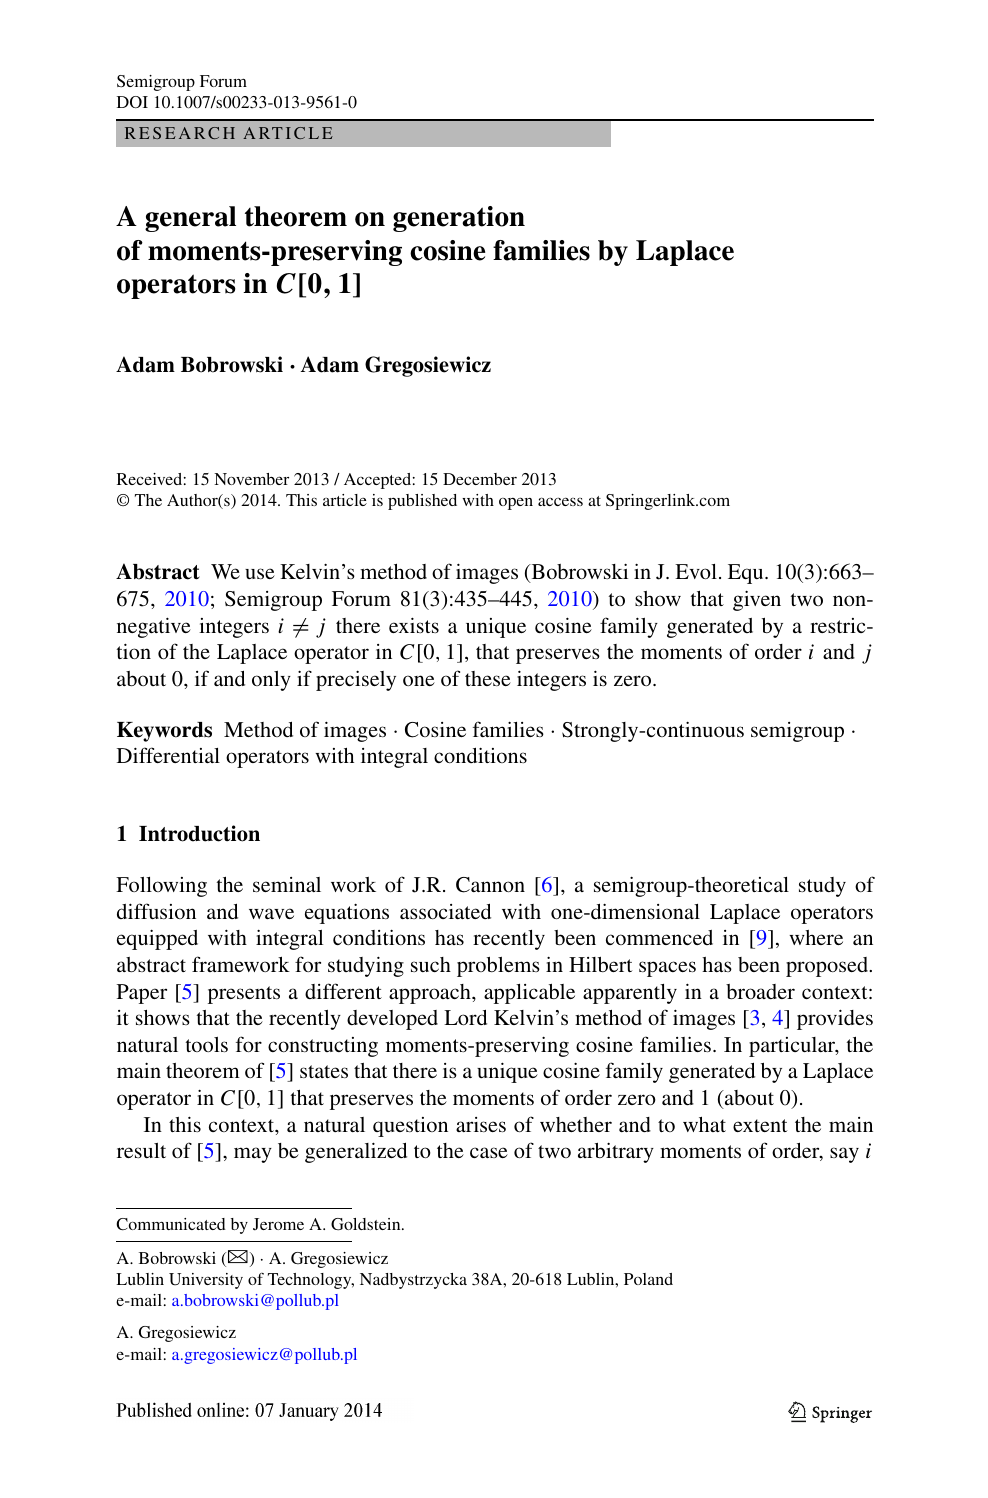 A General Theorem On Generation Of Moments Preserving Cosine Families By Laplace Operators In C 0 1 Topic Of Research Paper In Mathematics Download Scholarly Article Pdf And Read For Free On Cyberleninka Open